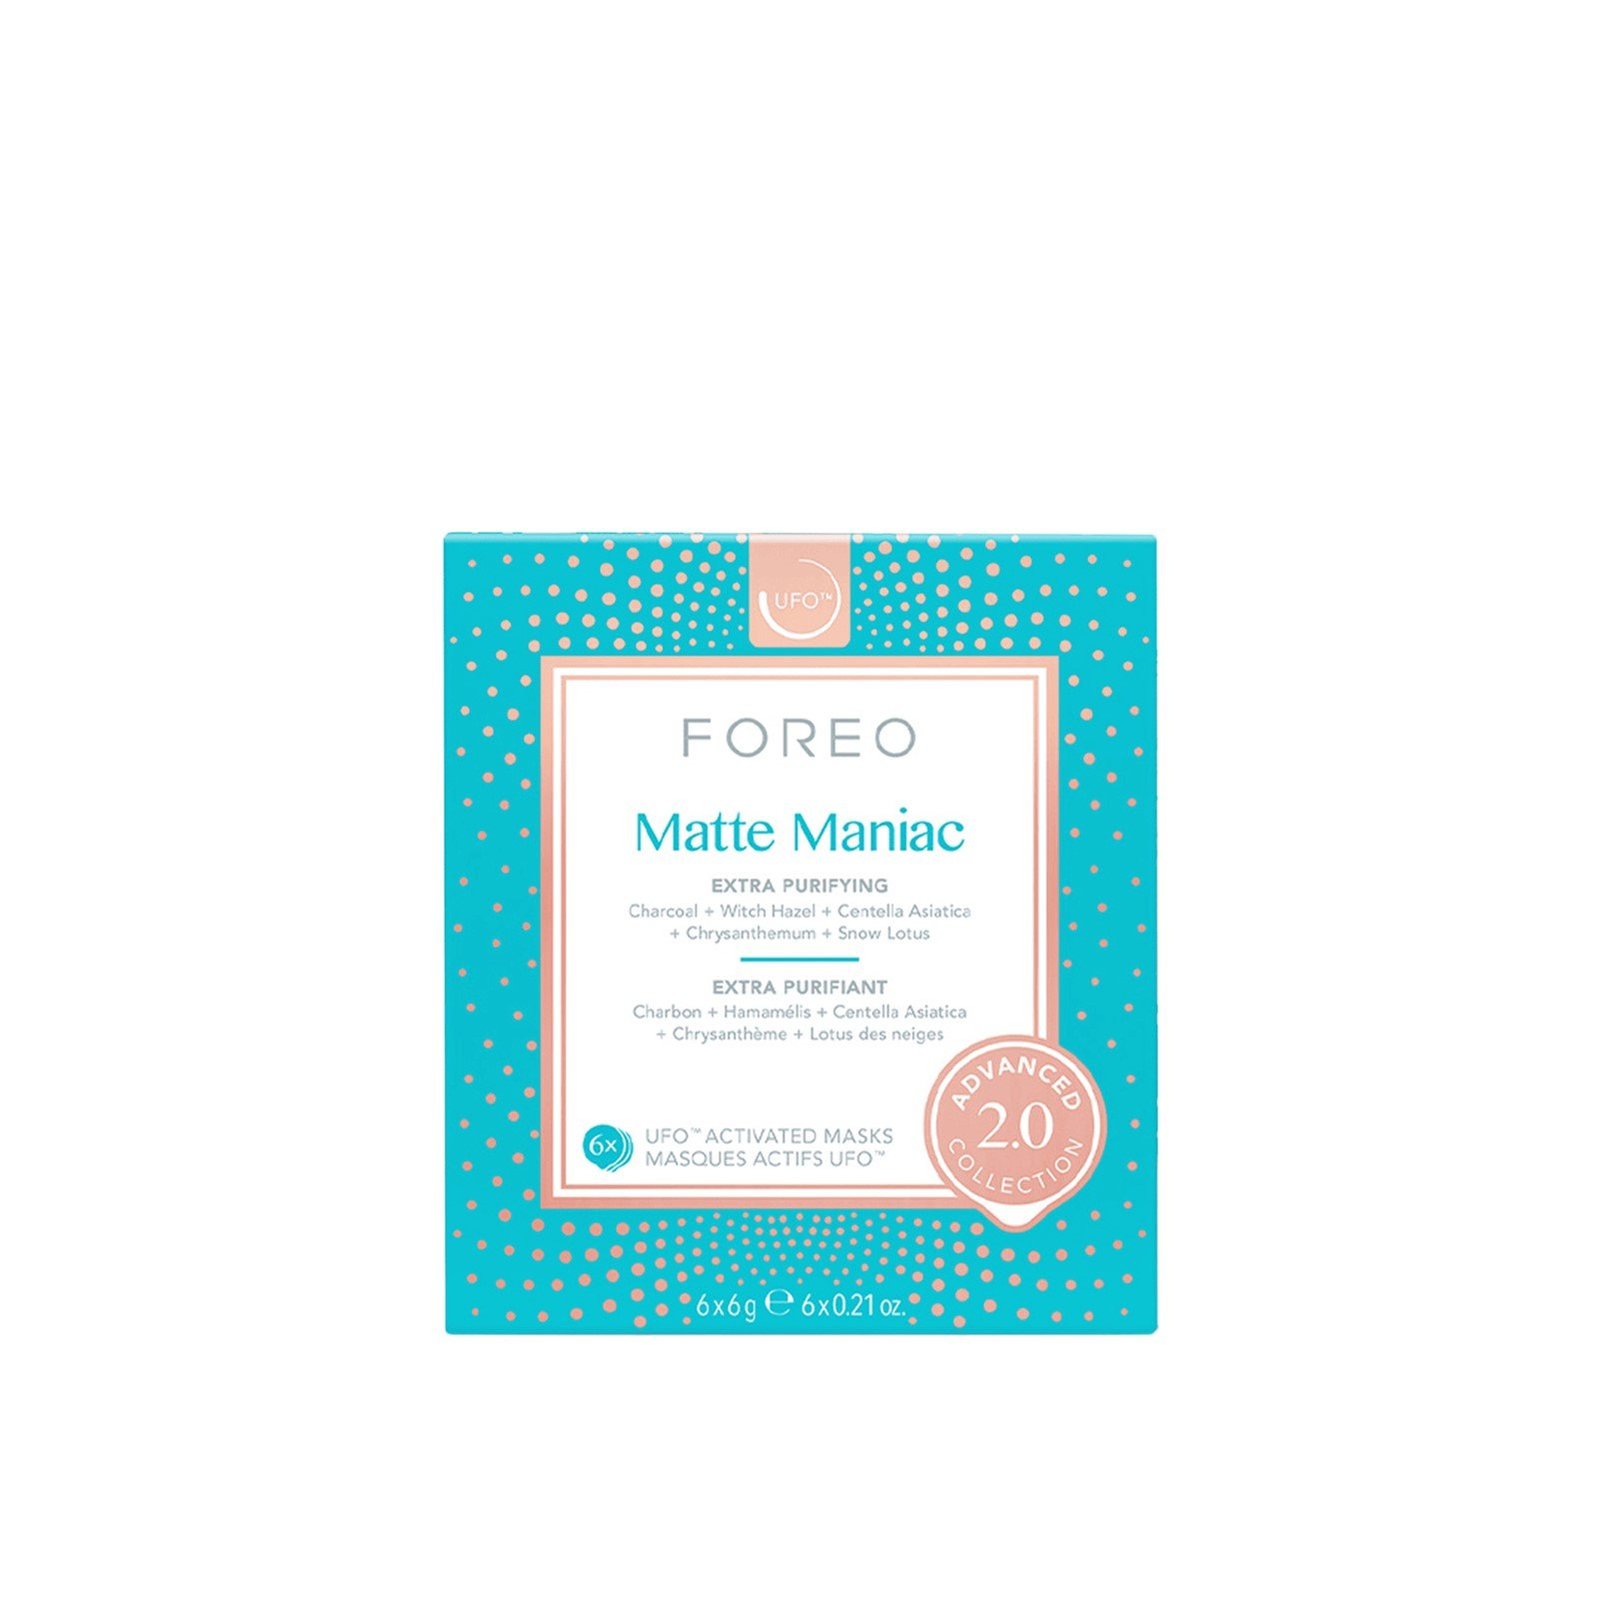 FOREO UFO™ Activated Facial Mask Matte Maniac 2.0 6x6g